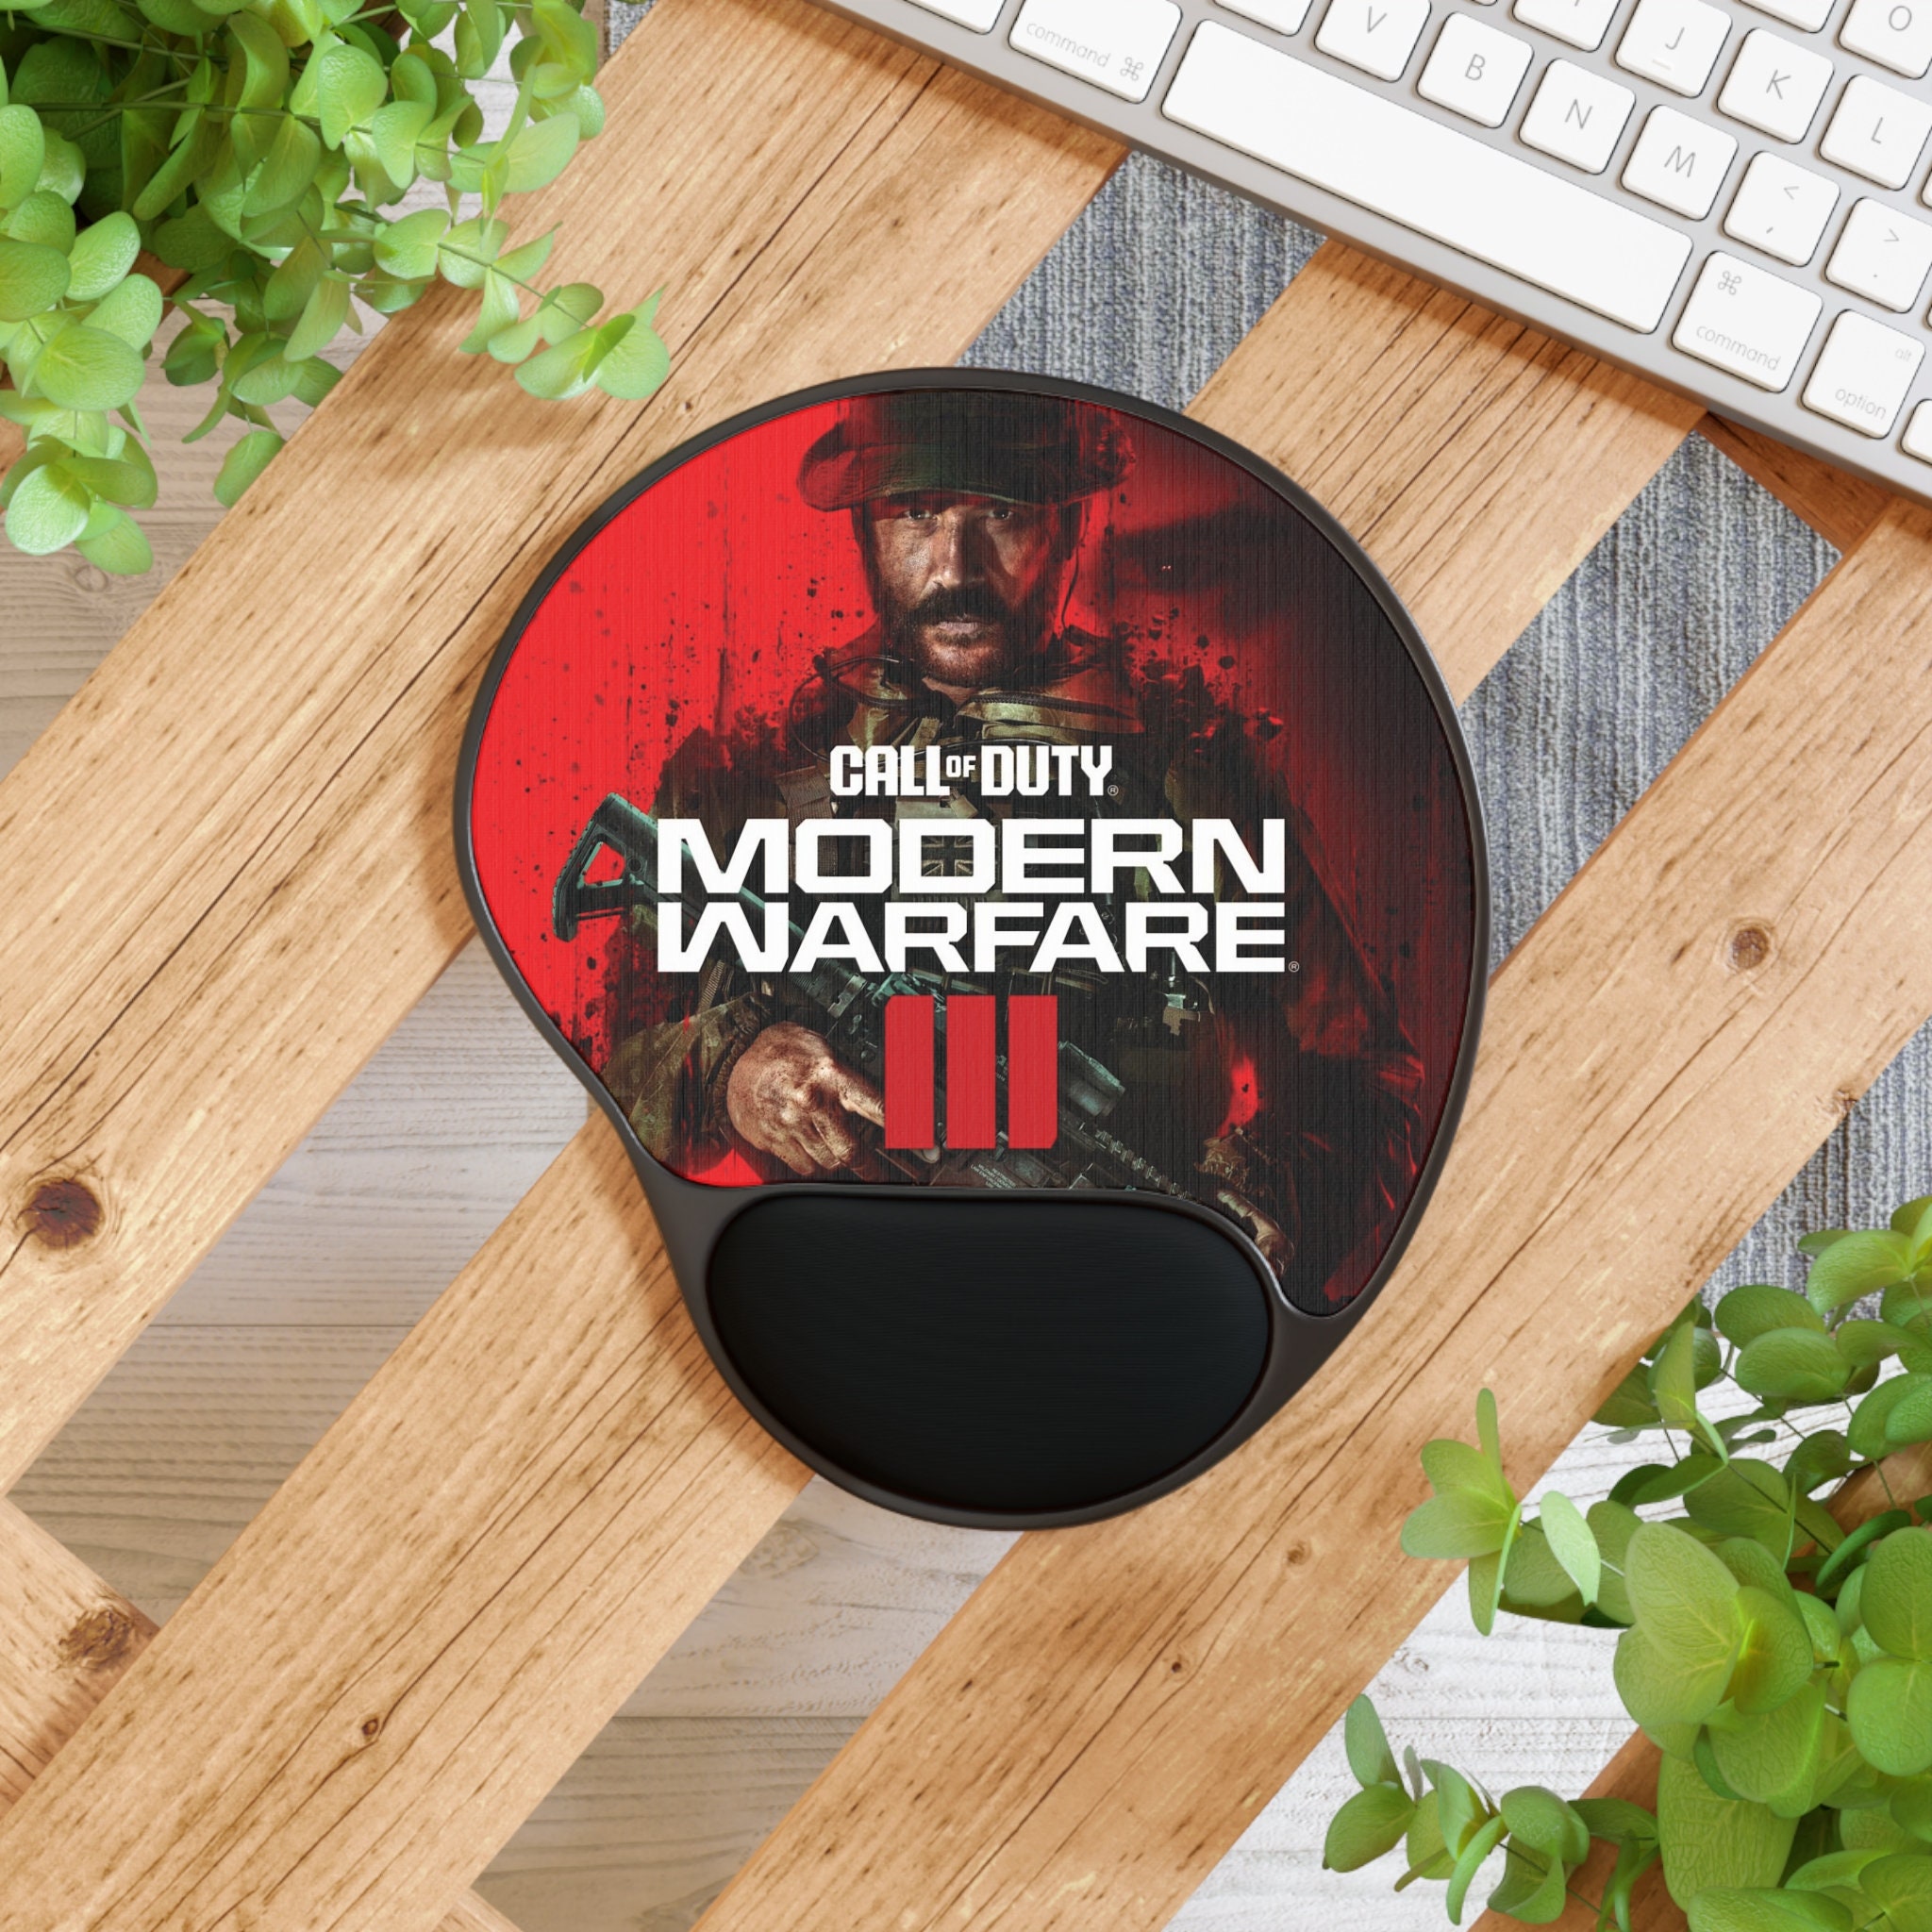 EUREKA ERGONOMIC & Call of Duty Modern Warfare Captain Price Gaming Mouse  Pad, Extended XXL Large Black Home Office Computer Desk Accessories  Keyboard